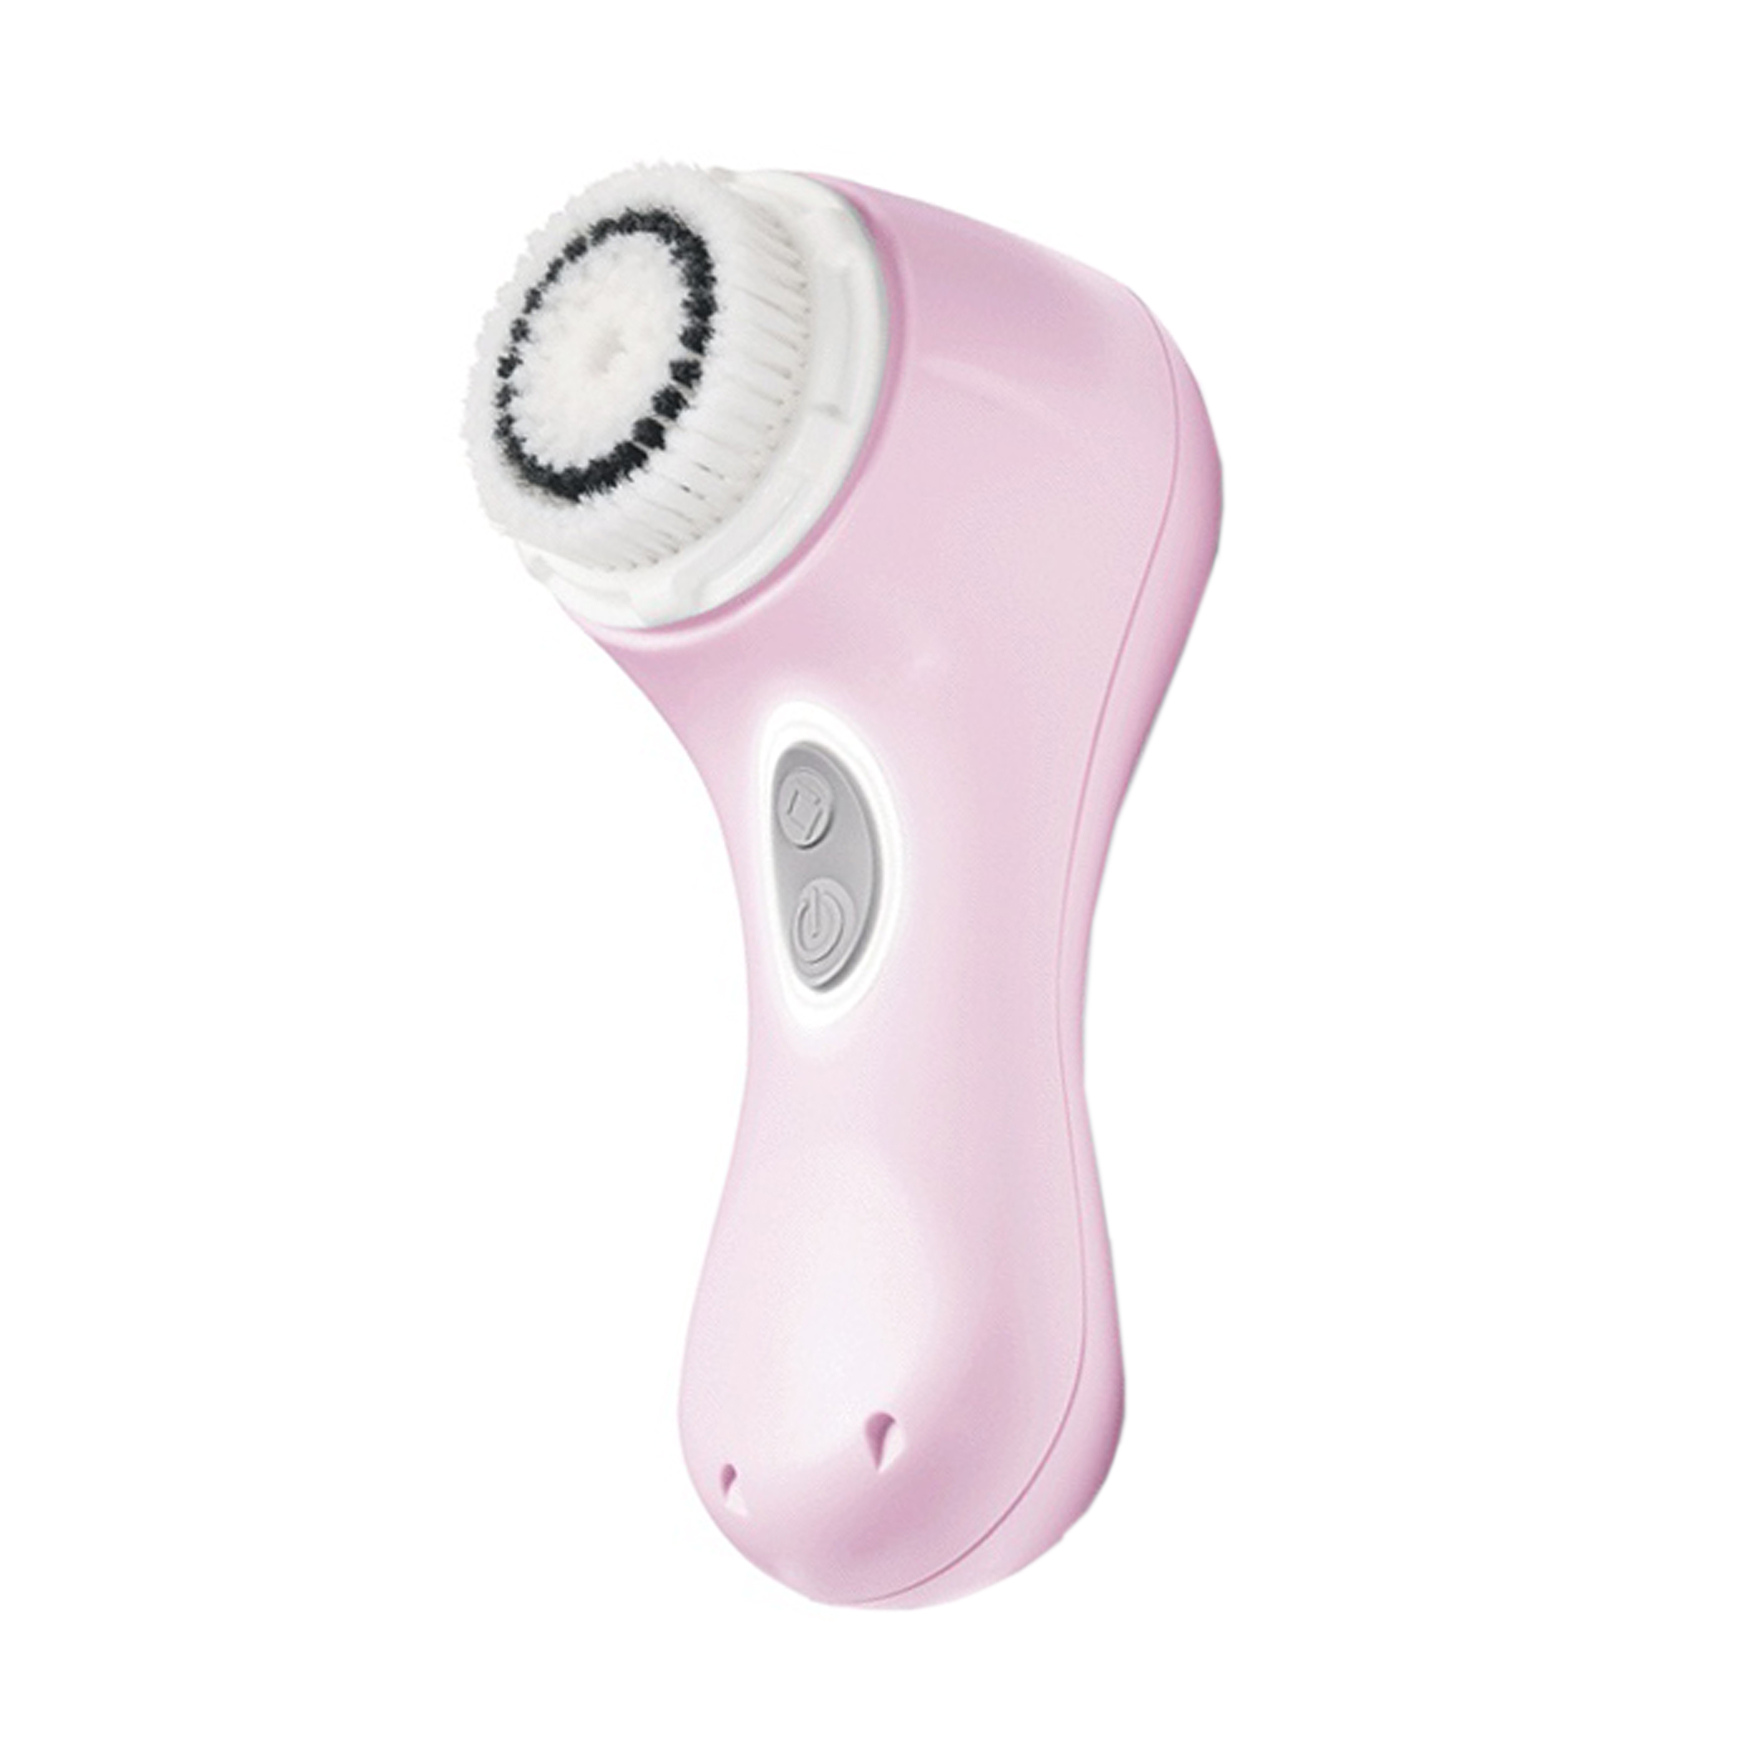 Clarisonic Pink Mia 2 | Space NK